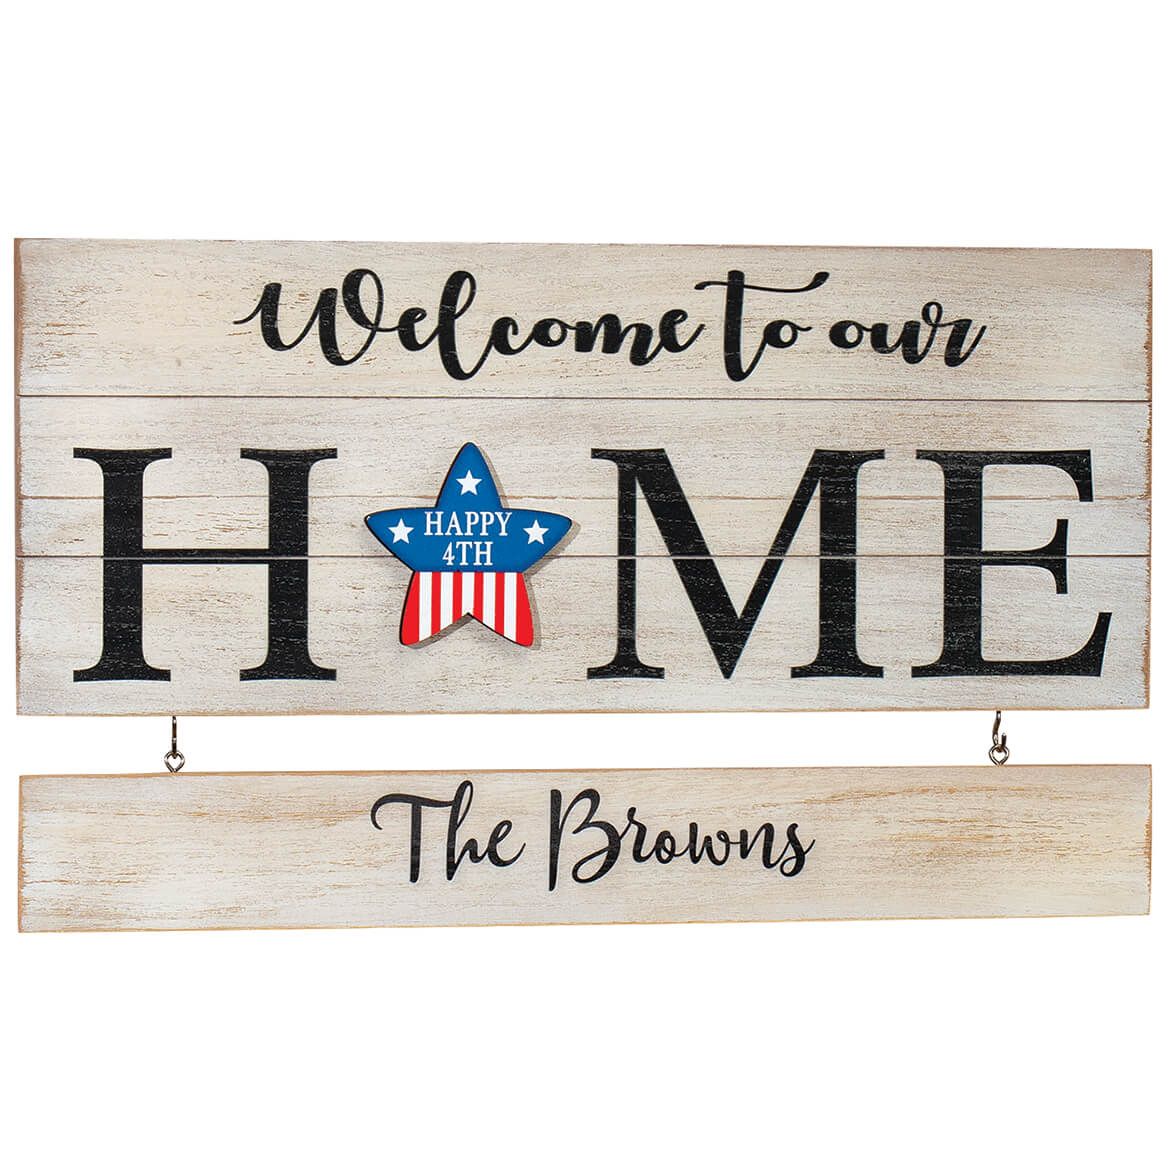 Personalized "Welcome to our Home" Holiday Plaque + '-' + 371319